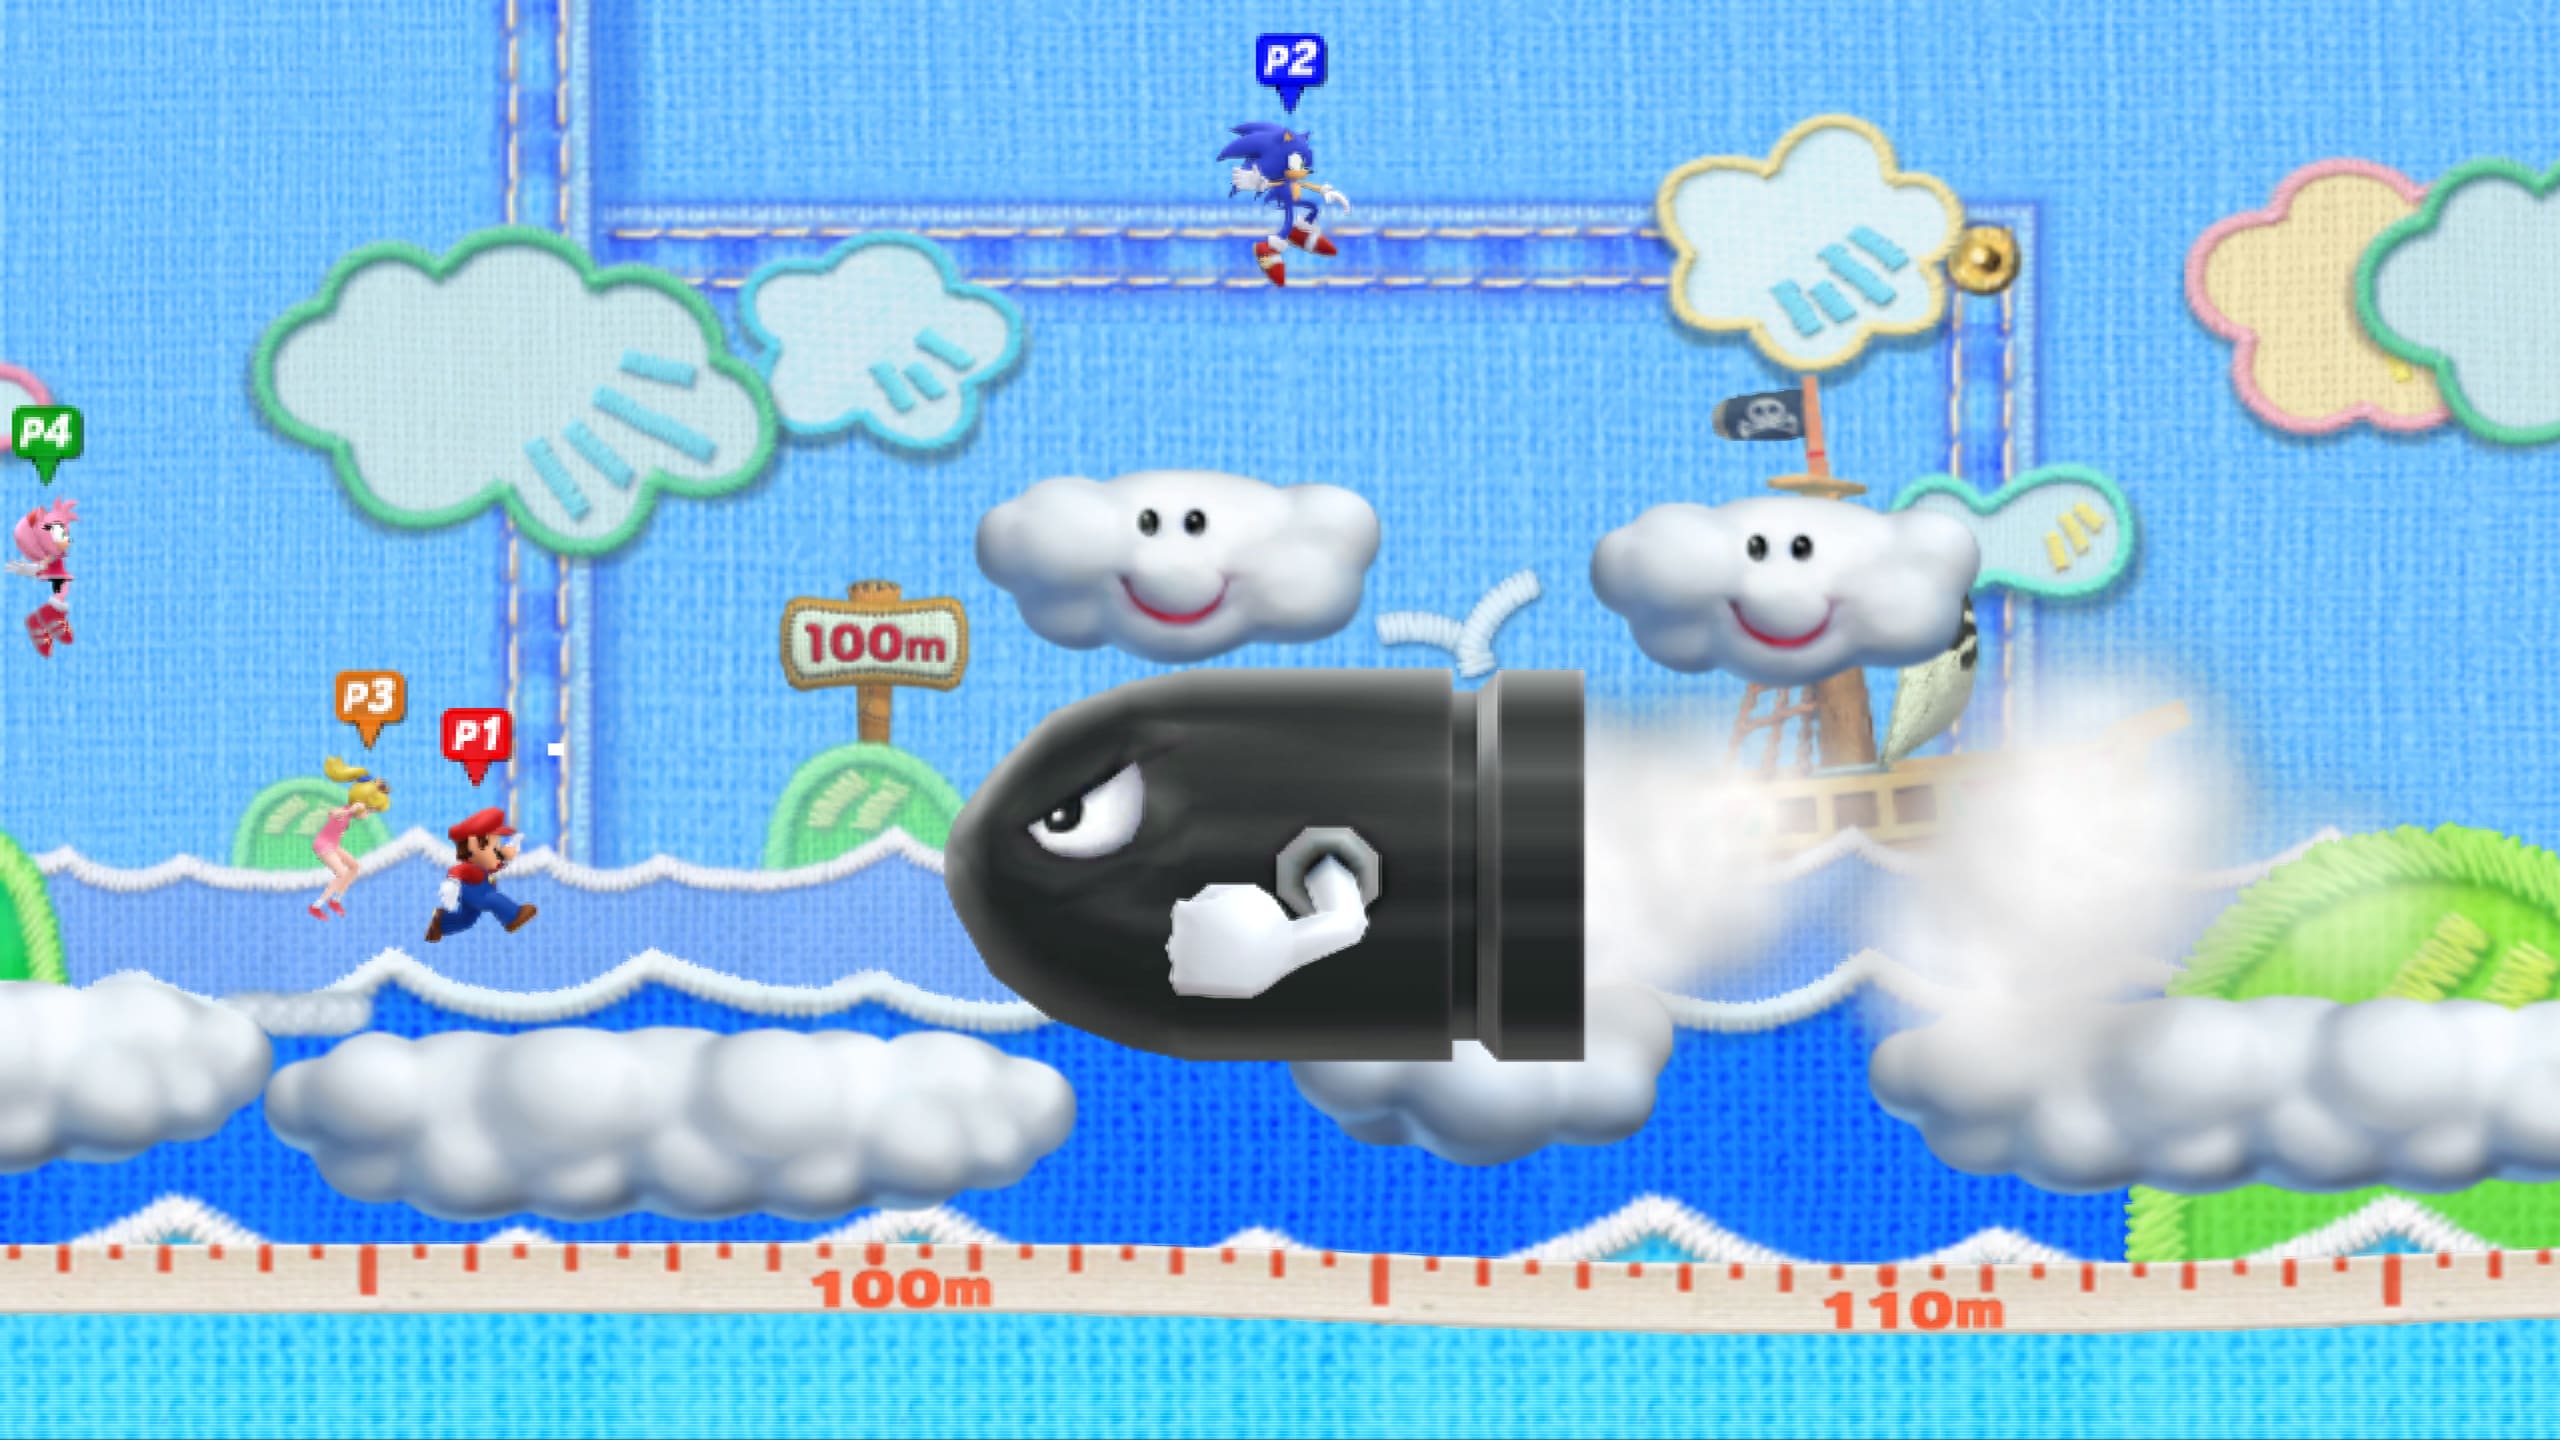 Mario & Sonic At The London 2012 Olympic Games Review Screenshot 4